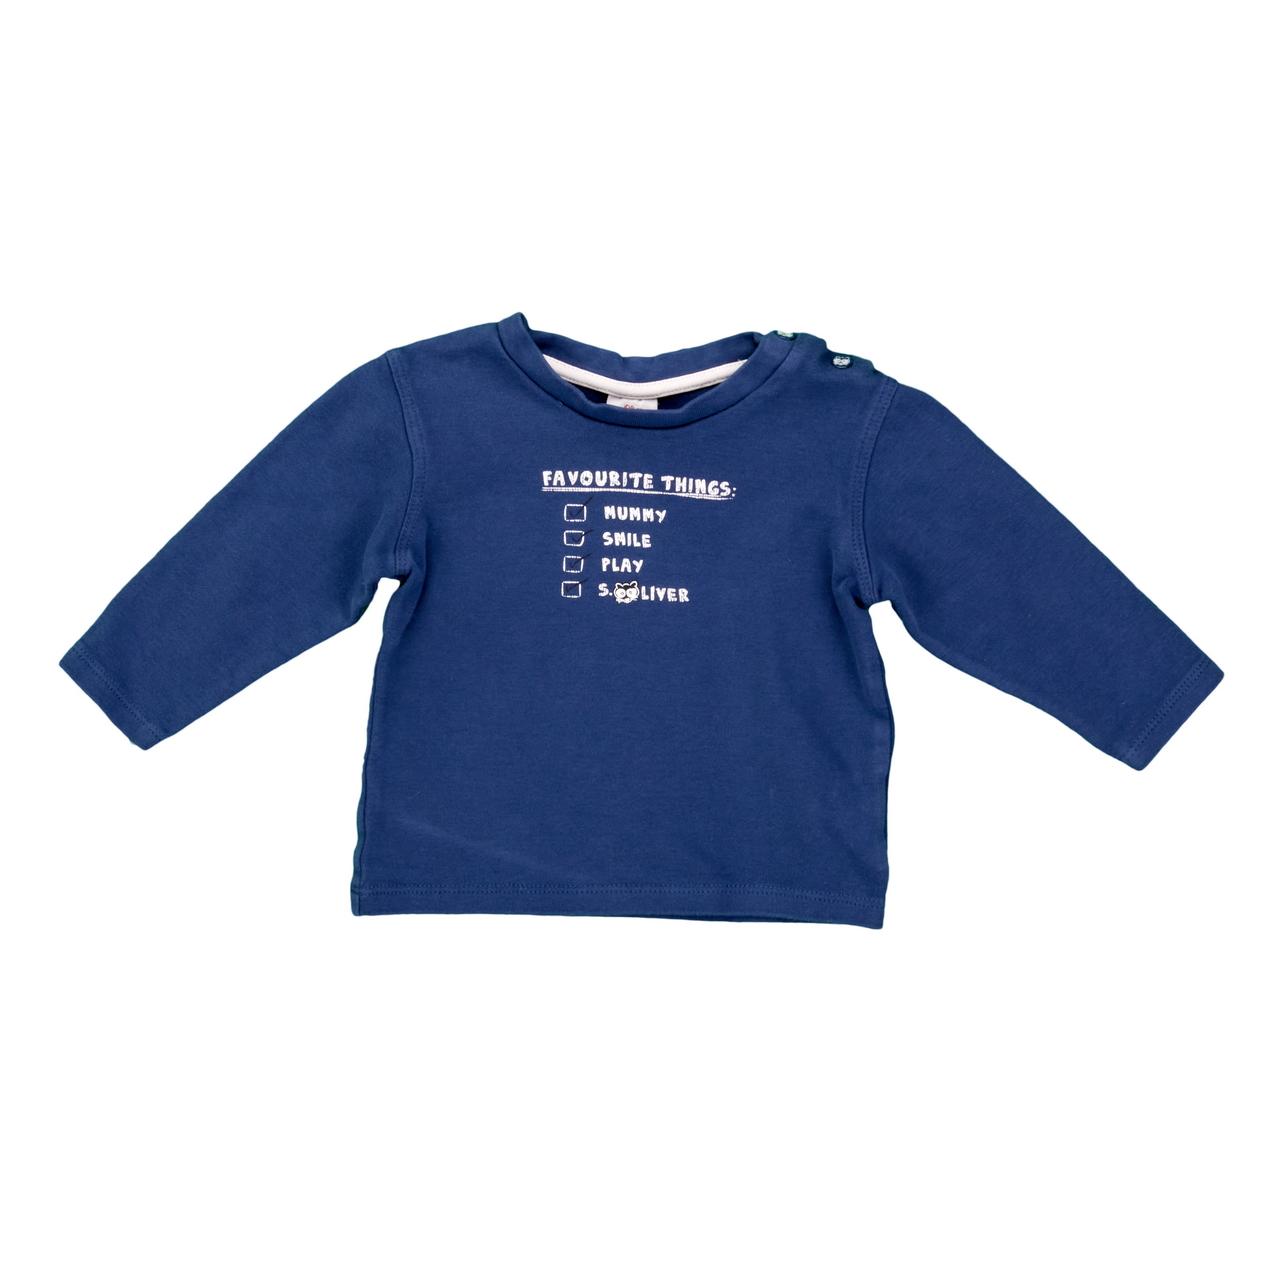 Second-Hand - for Kids Reconditioned s. Clothing Oliver